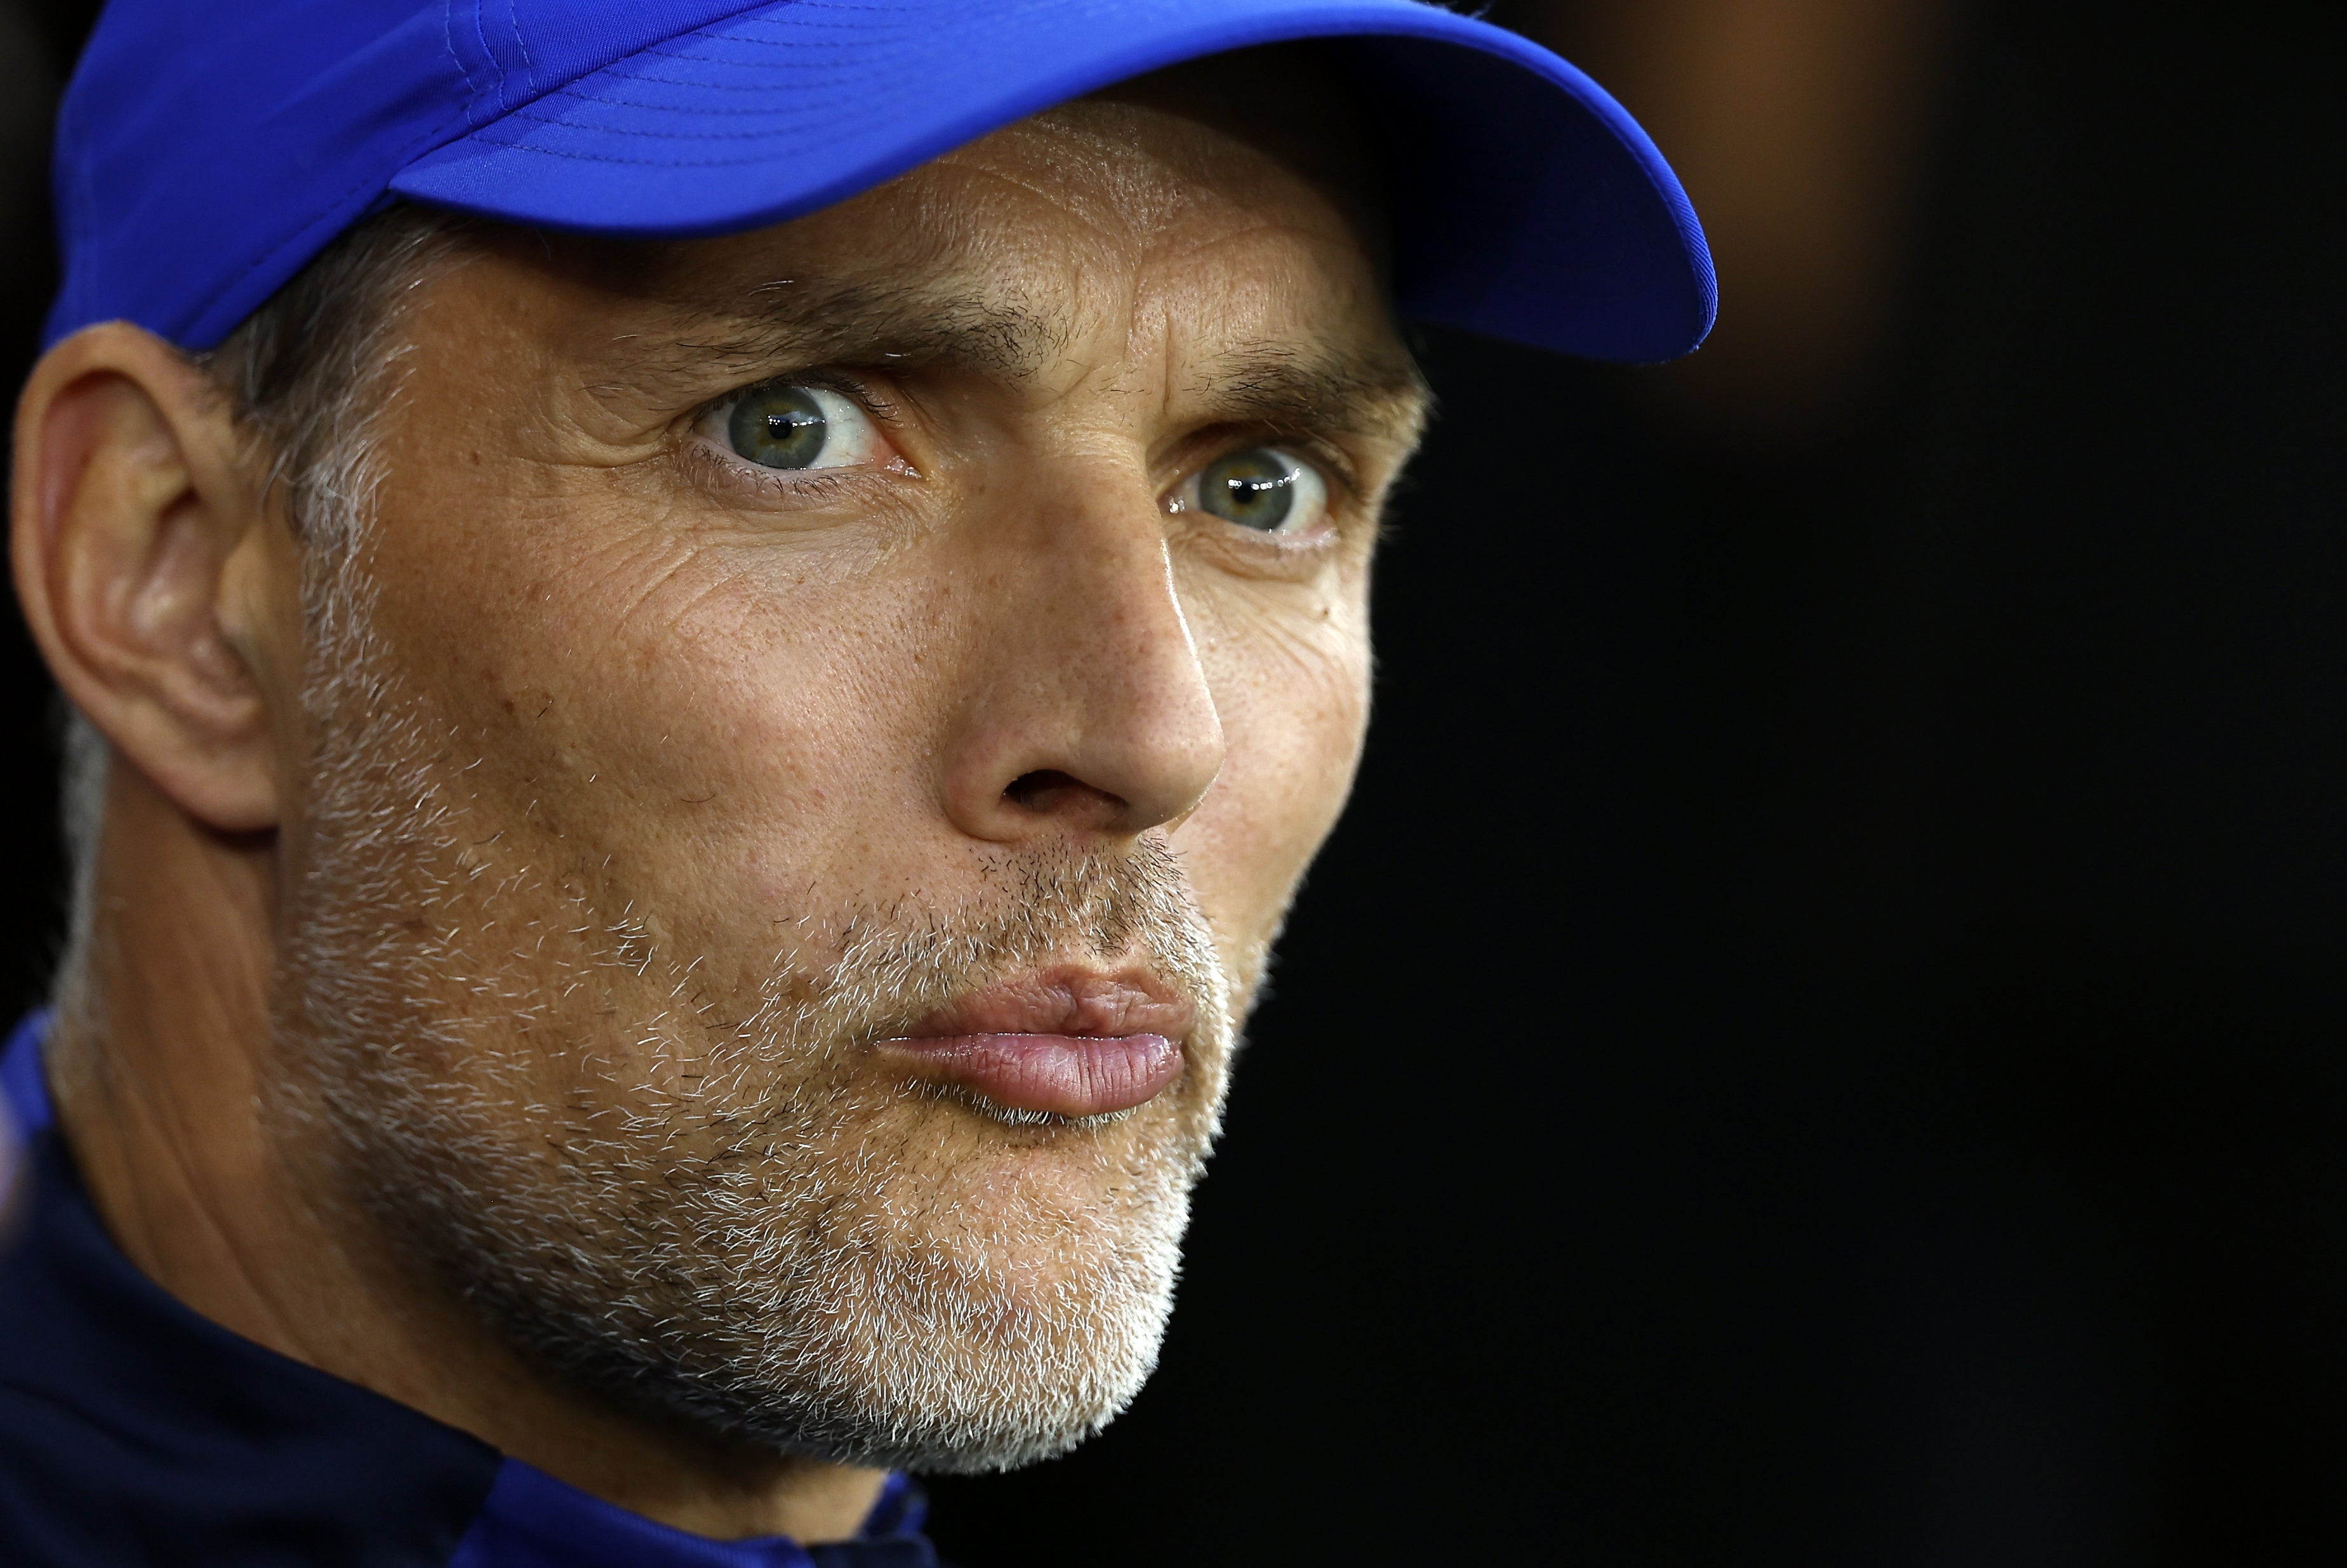 Chelsea boss Thomas Tuchel, pictured, is cutting a cautious approach to talking about referees after hefty fines (Steven Paston/PA)